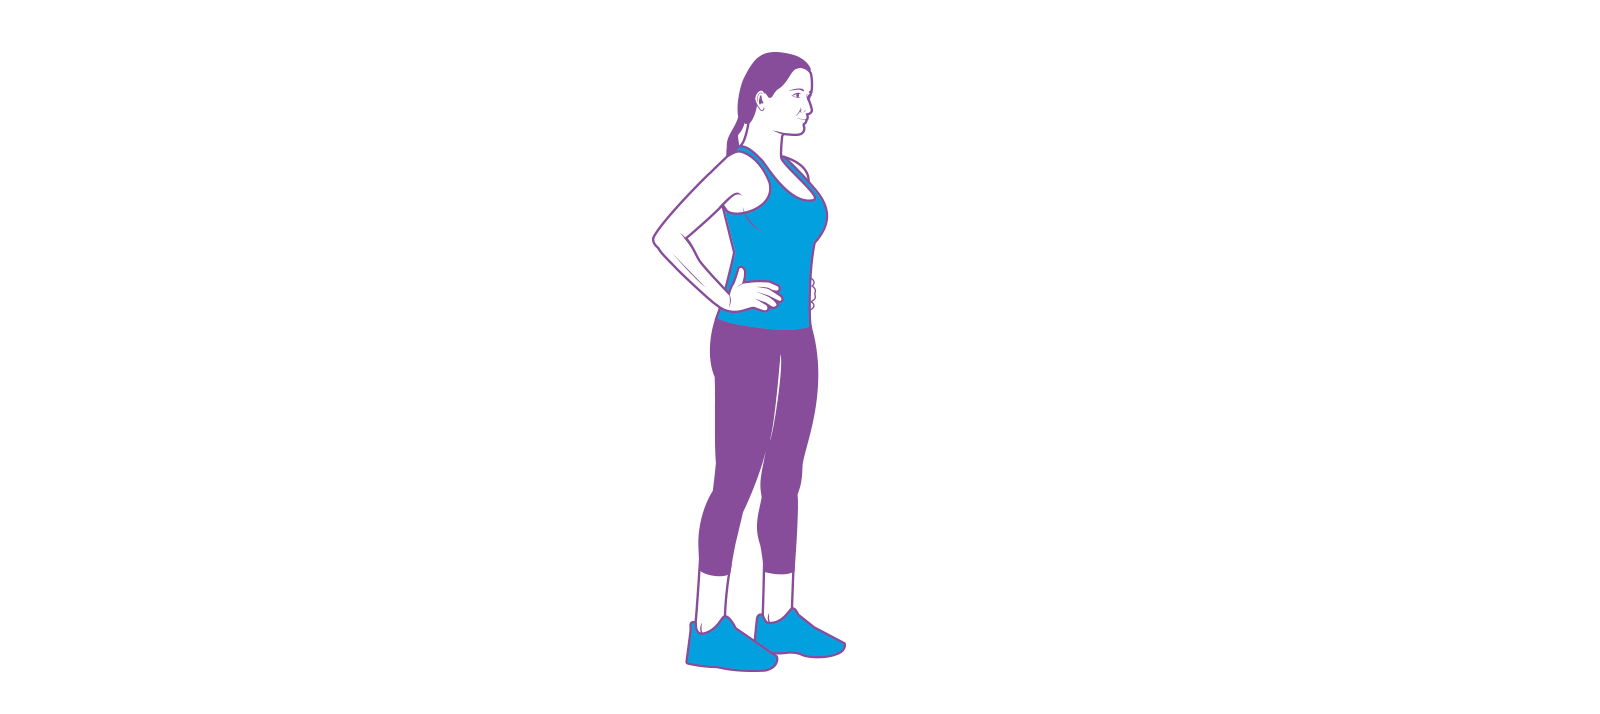 Animated illustration of woman doing a lunge exercise